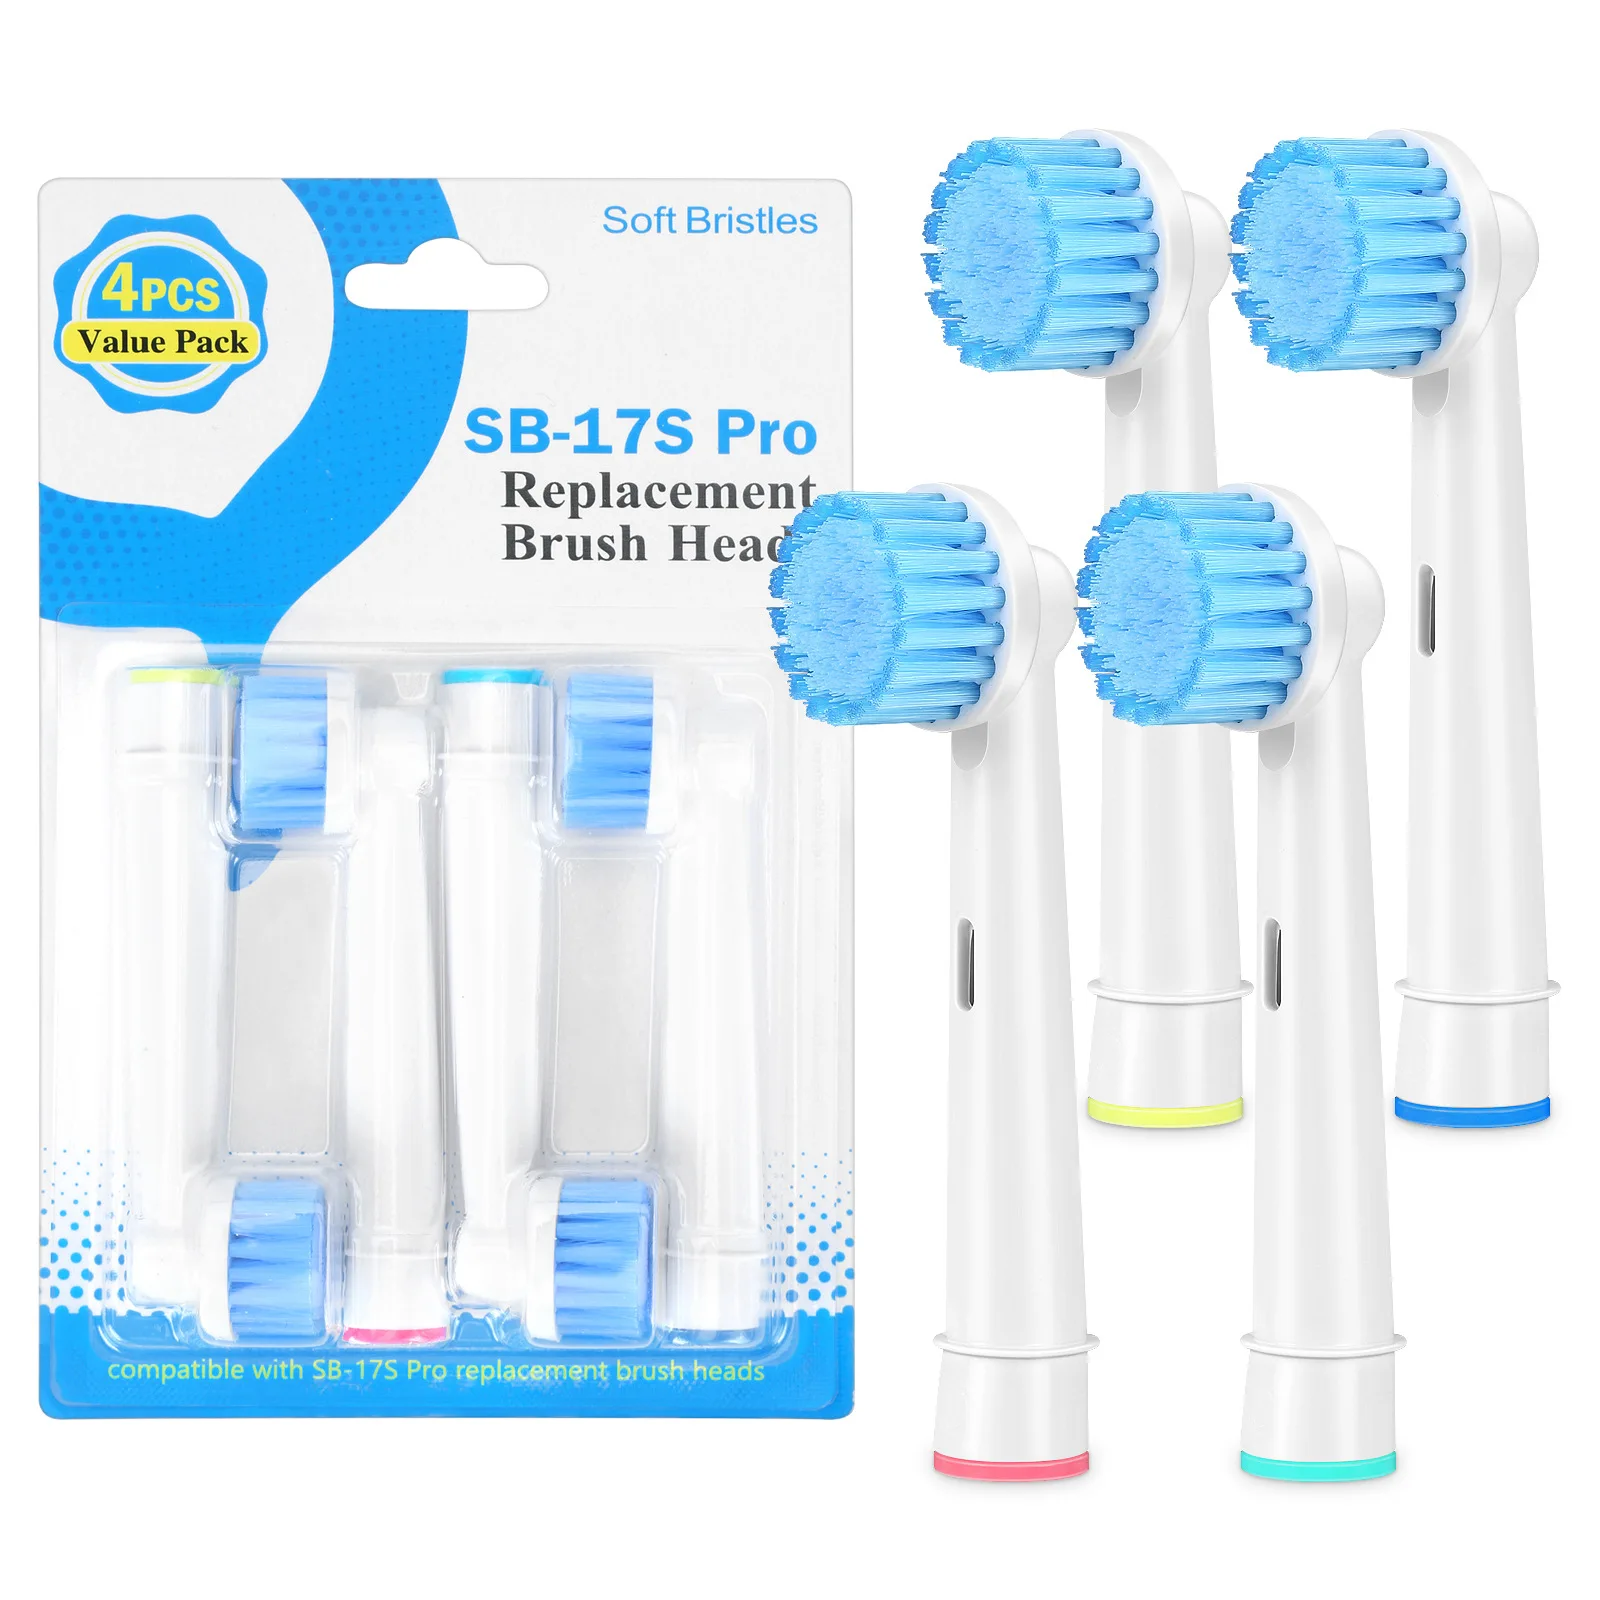 4 Pcs/Pack Replacement Brush Heads For Oral B Electric Toothbrush Head Soft Dupont Bristle Teeth Cleaning & Whitening Brush Head 4 pcs replacement brush heads for x q m q x 3 x 2 sonic electric toothbrush dupont bristle nozzles for teeth cleaning oral care